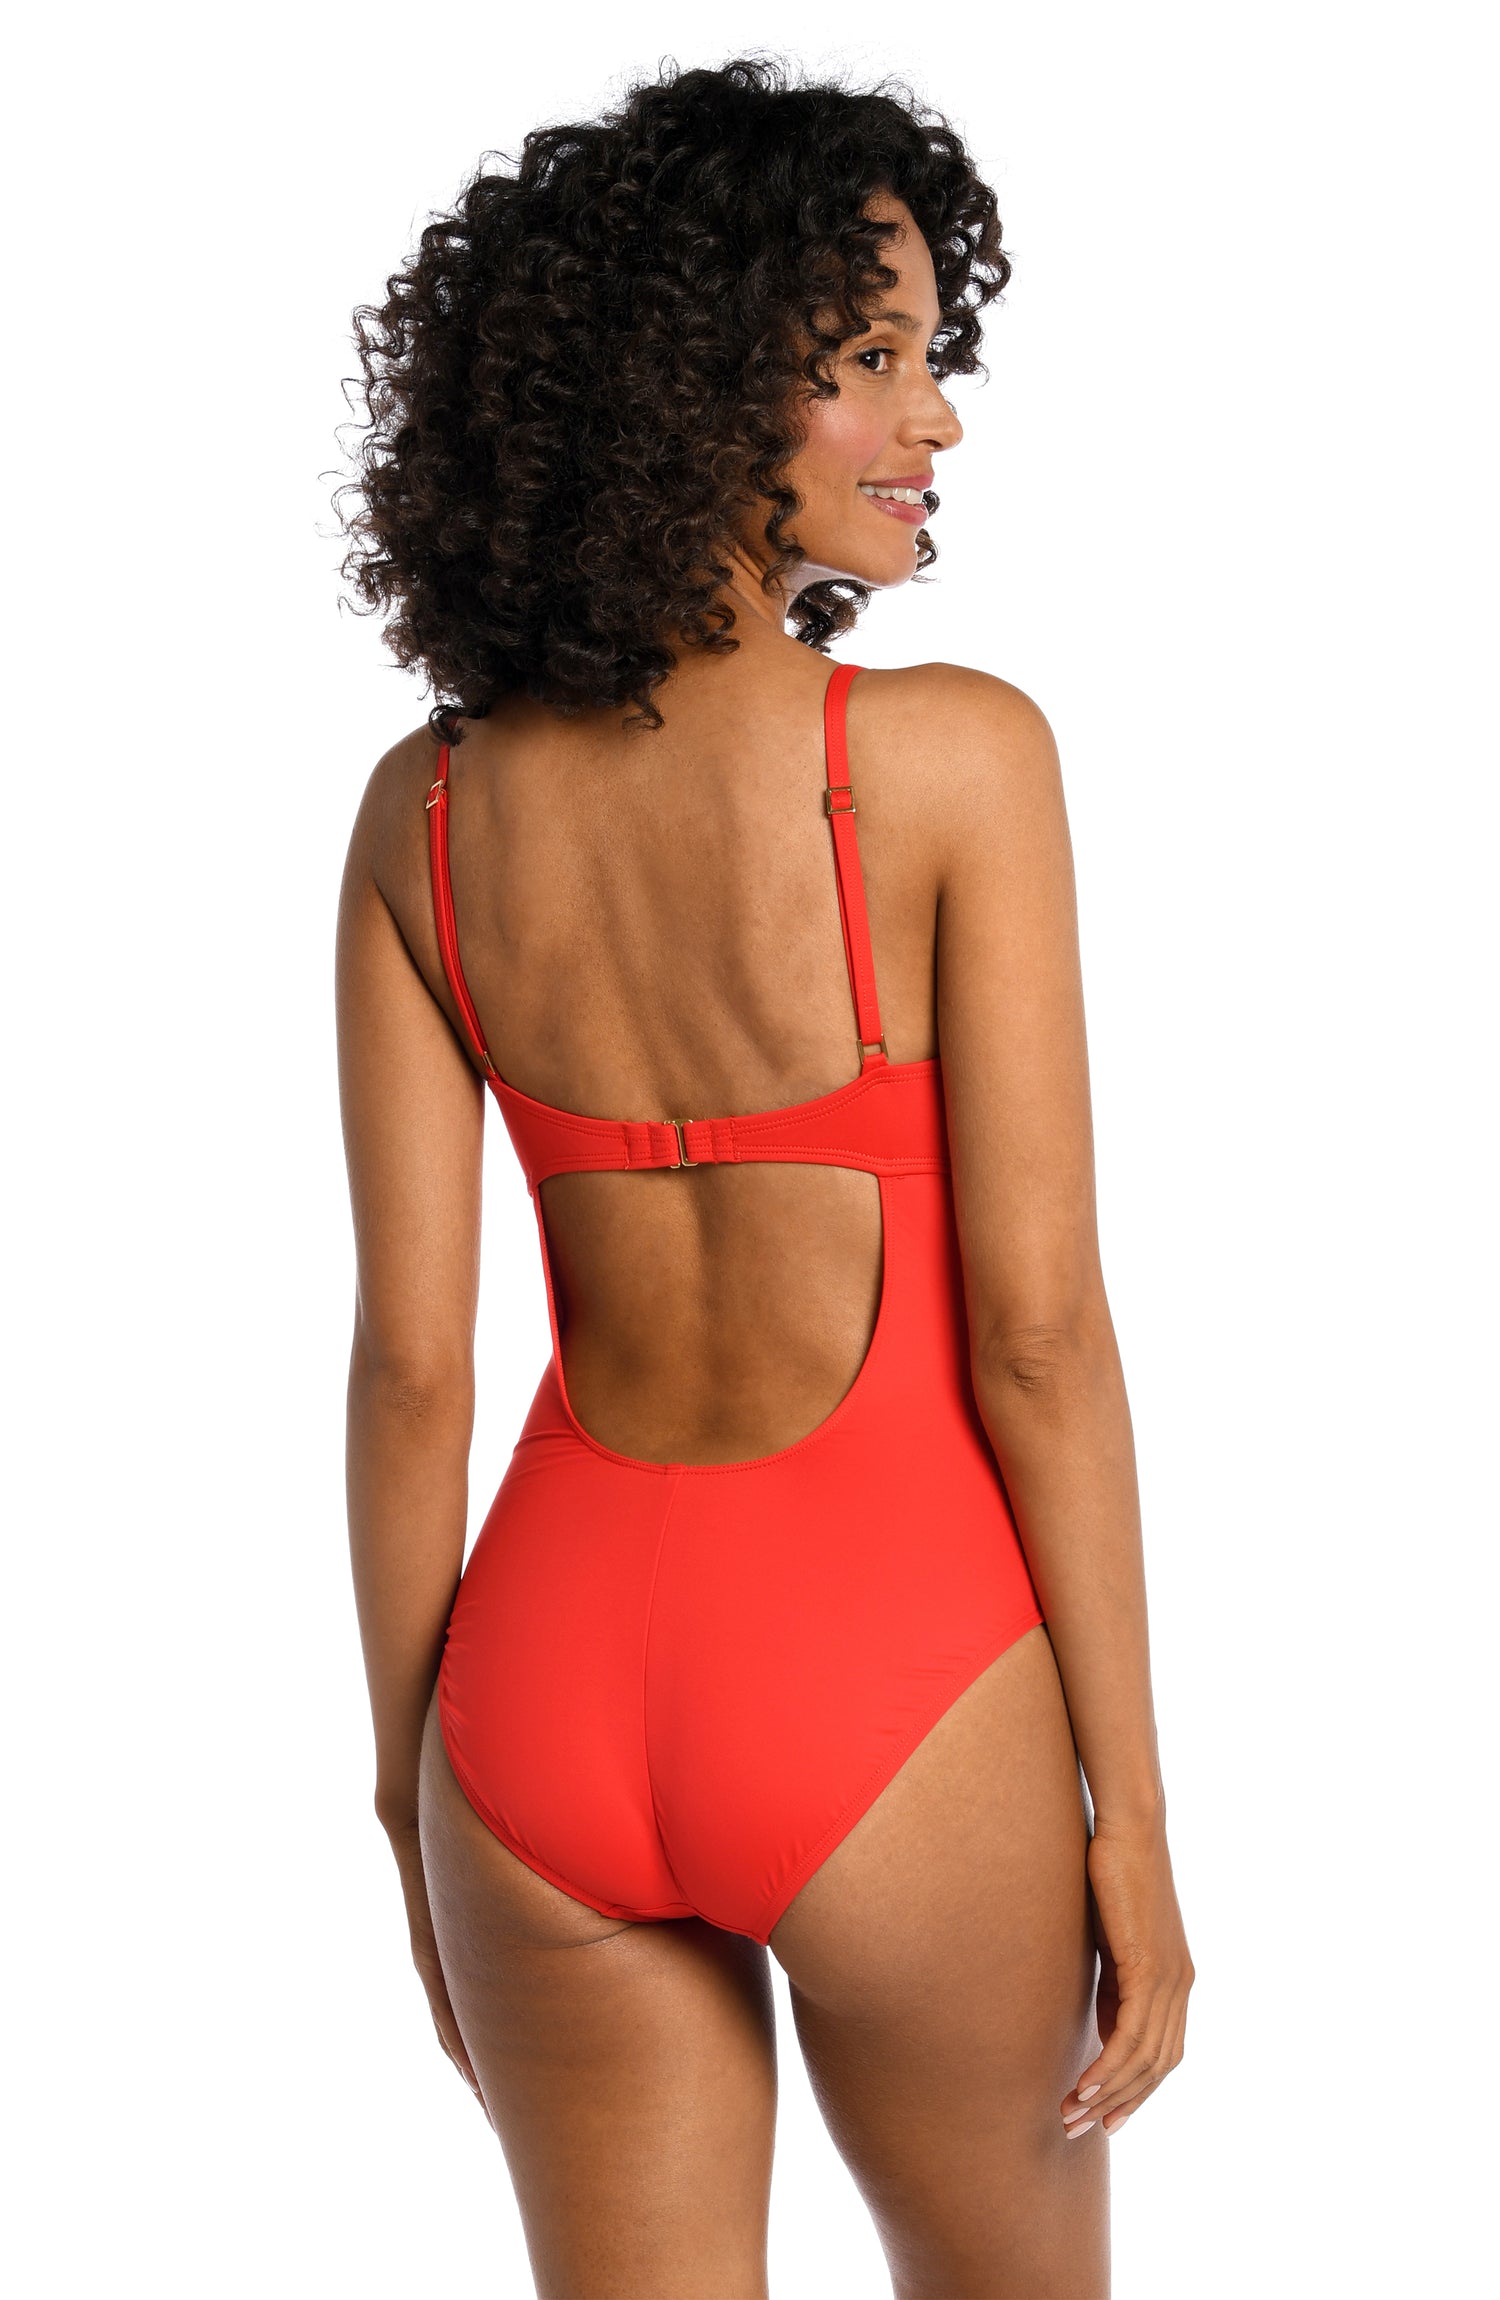 Model is wearing a cherry colored one piece swimsuit from our Best-Selling Island Goddess collection.